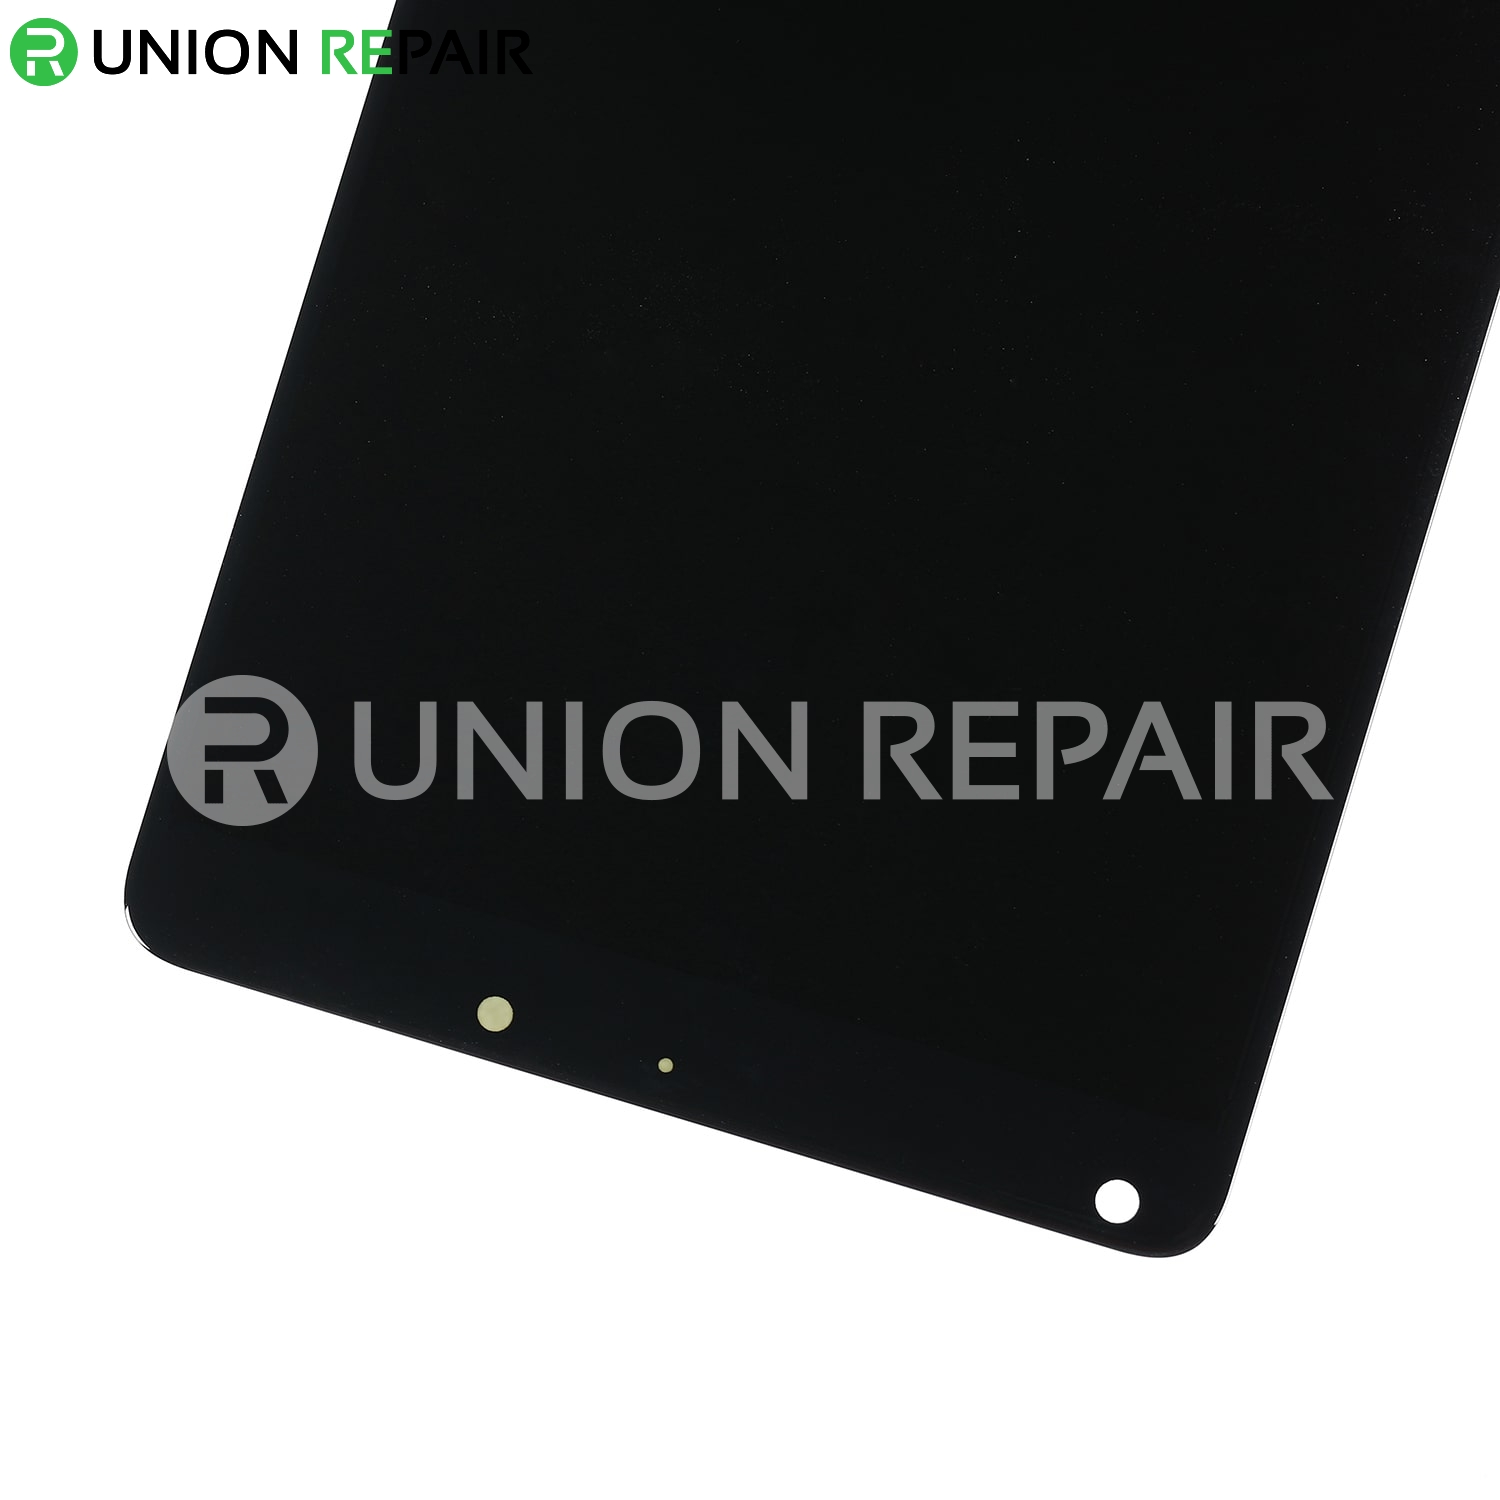 Replacement for XiaoMi MIX 2 LCD Screen Digitizer - Black